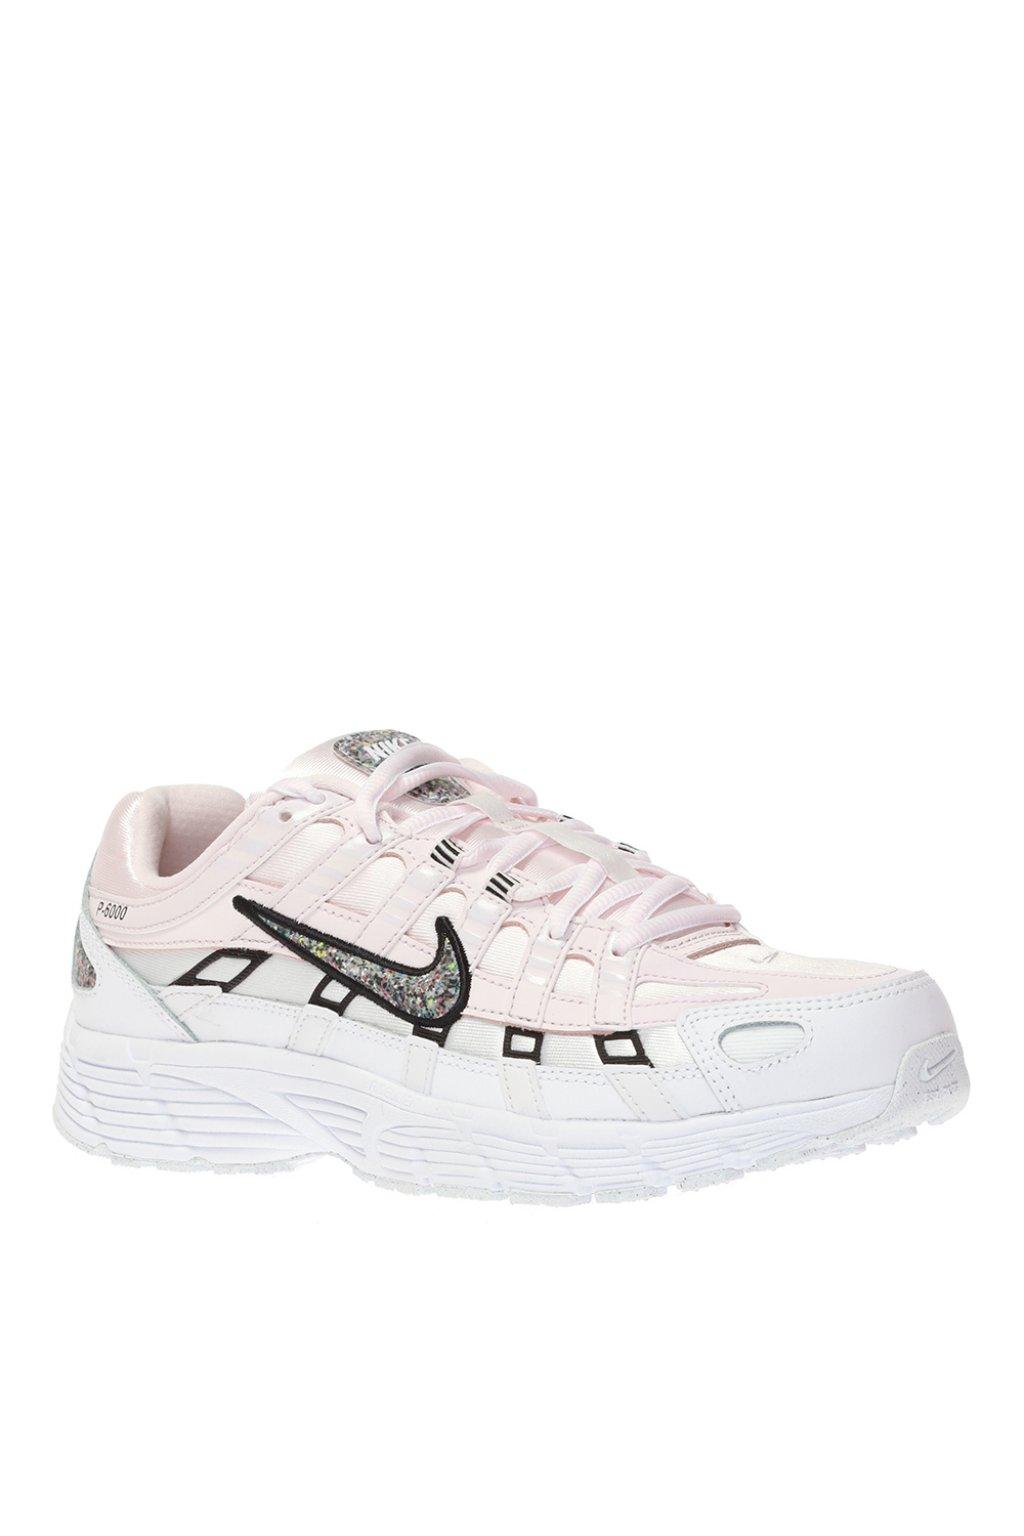 Nike Rubber P-6000 Sneakers in Pink | Lyst